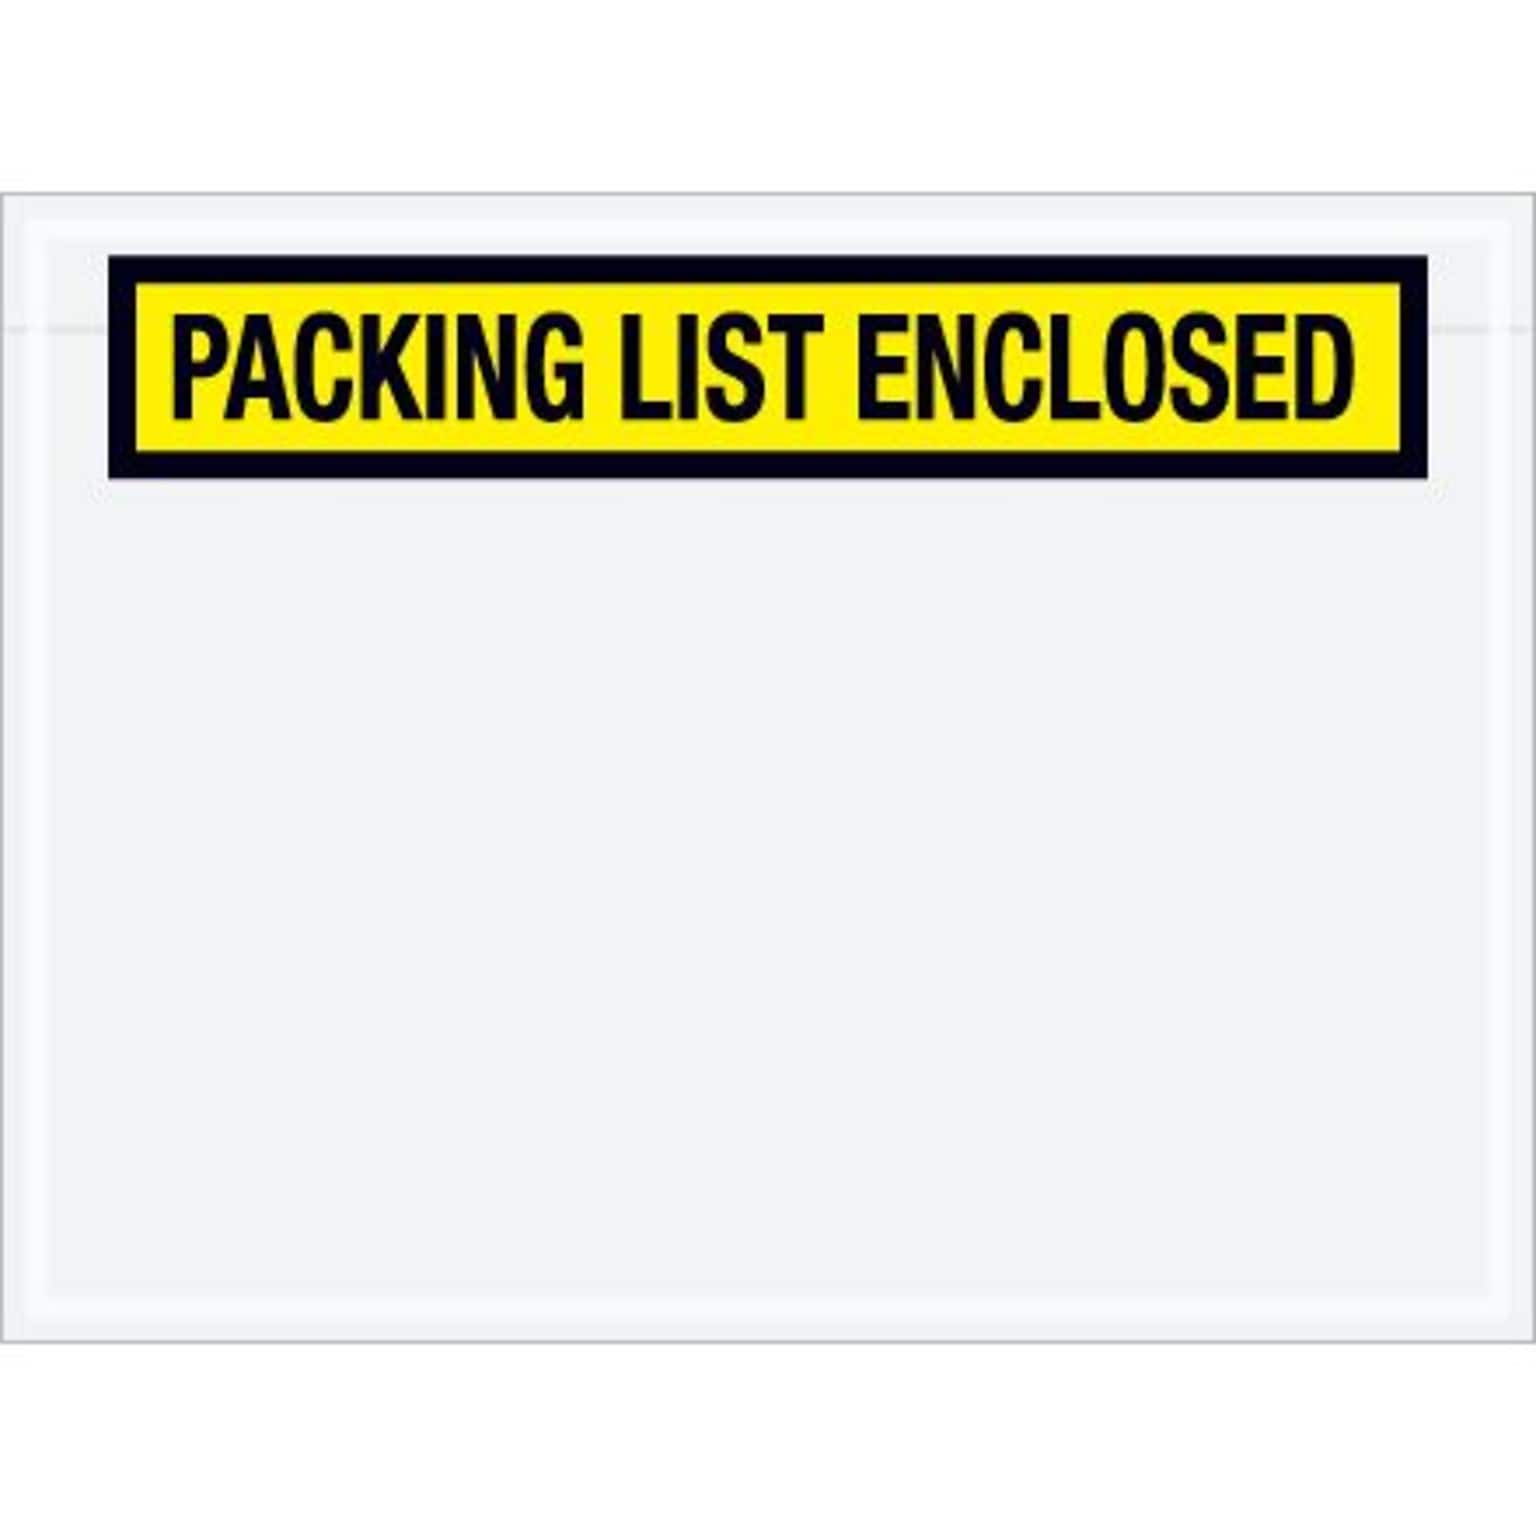 Quill Brand Packing List Envelope, 4 1/2 x 6 - Yellow Panel Face, Packing List Enclosed, 1000/Case